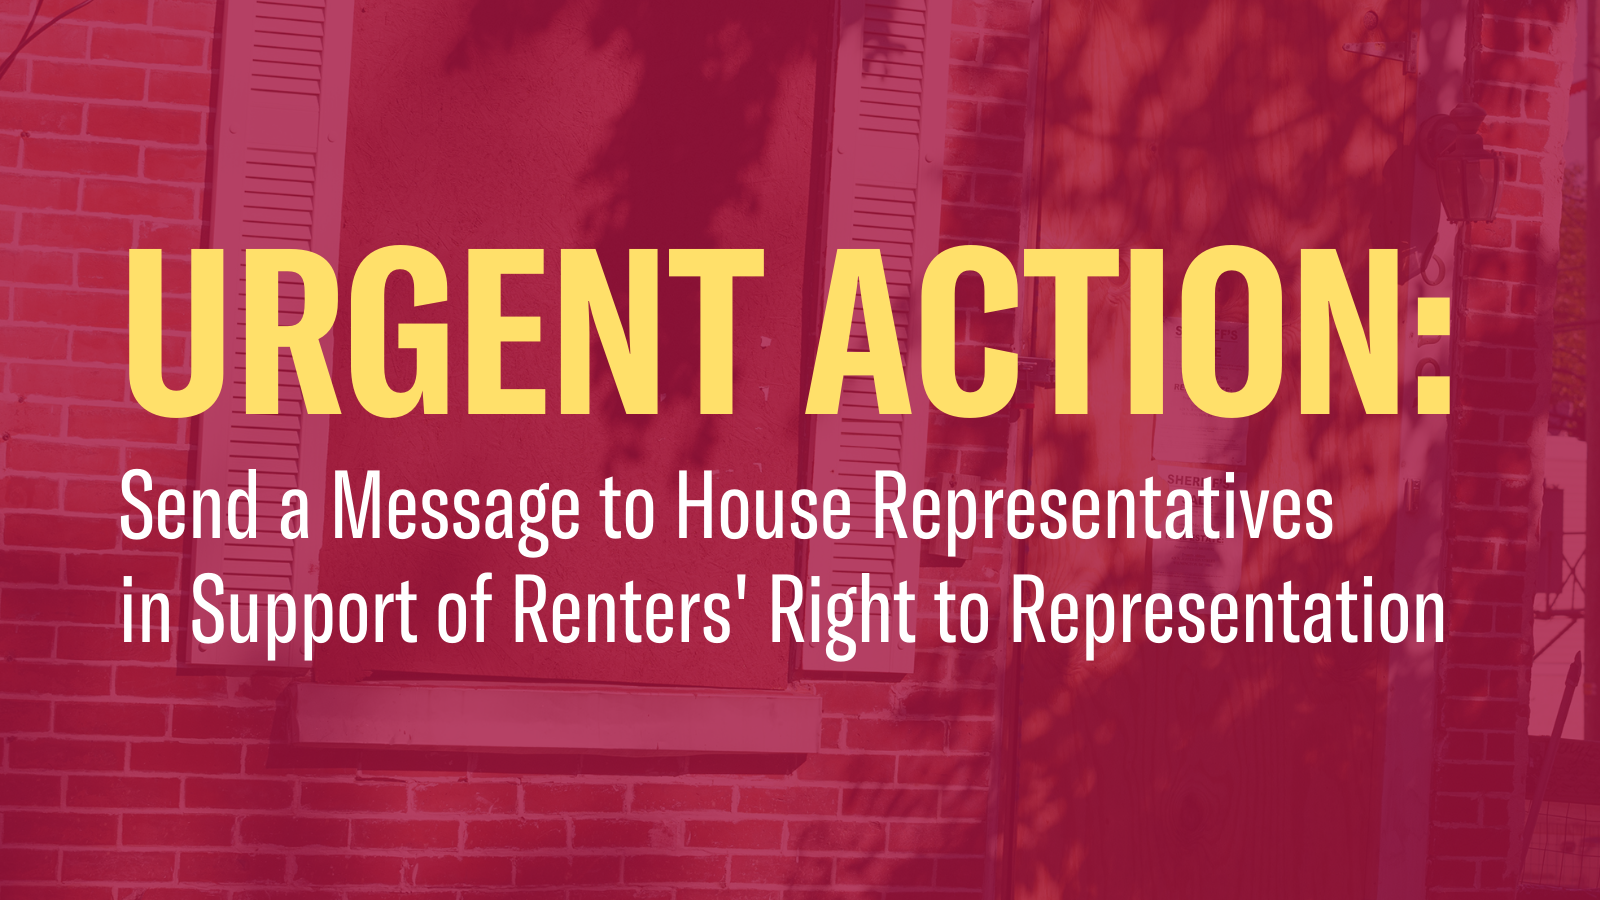 Urgent action: send a message to the House of Representatives to support renters' right to representation.